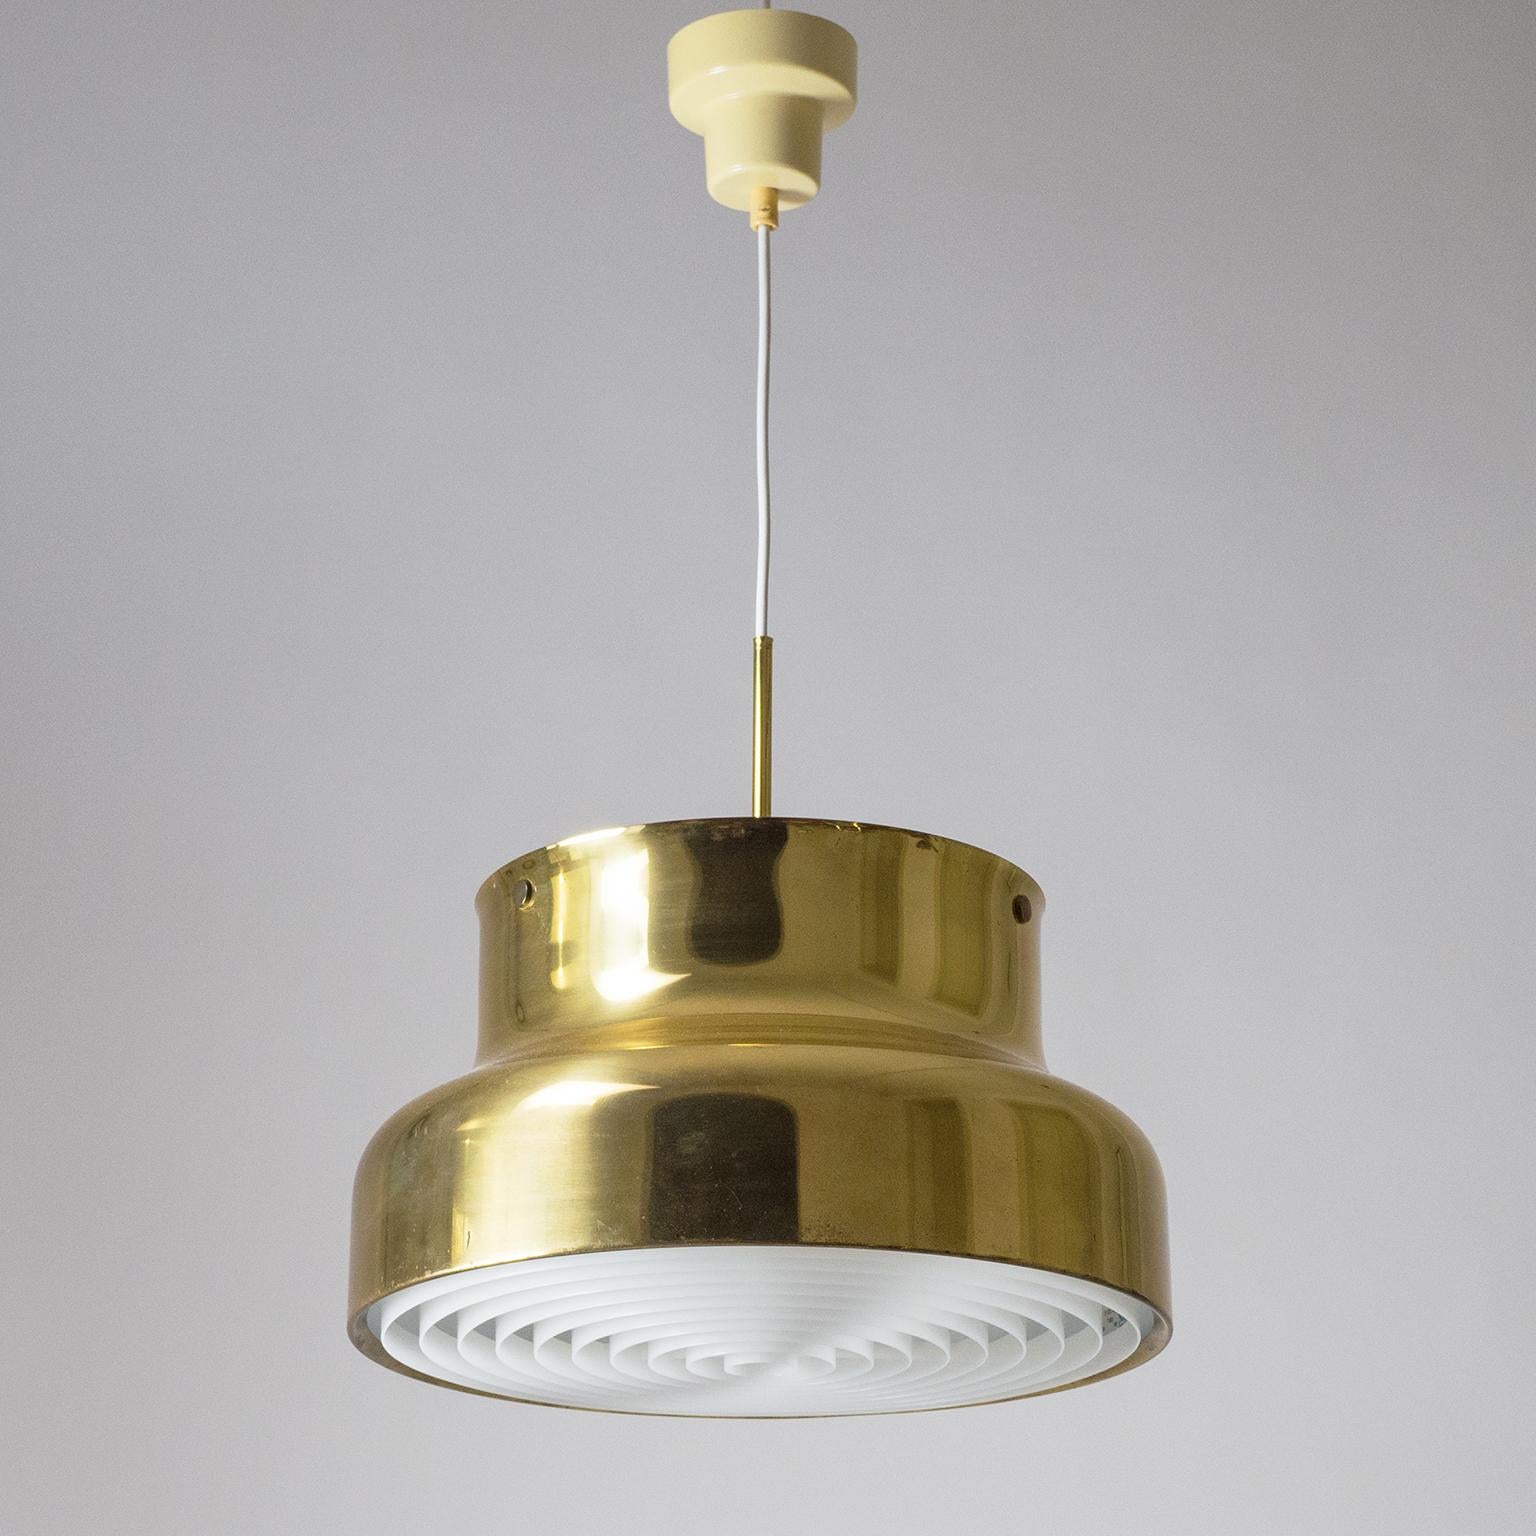 Large brass 'Bumling' pendant by Anders Pherson from the 1970s. Fine condition with a lovely patina on the brass. Brand new acrylic diffuser as well as new wiring to the two original E27 sockets. Please note that the on/off switch on top of the